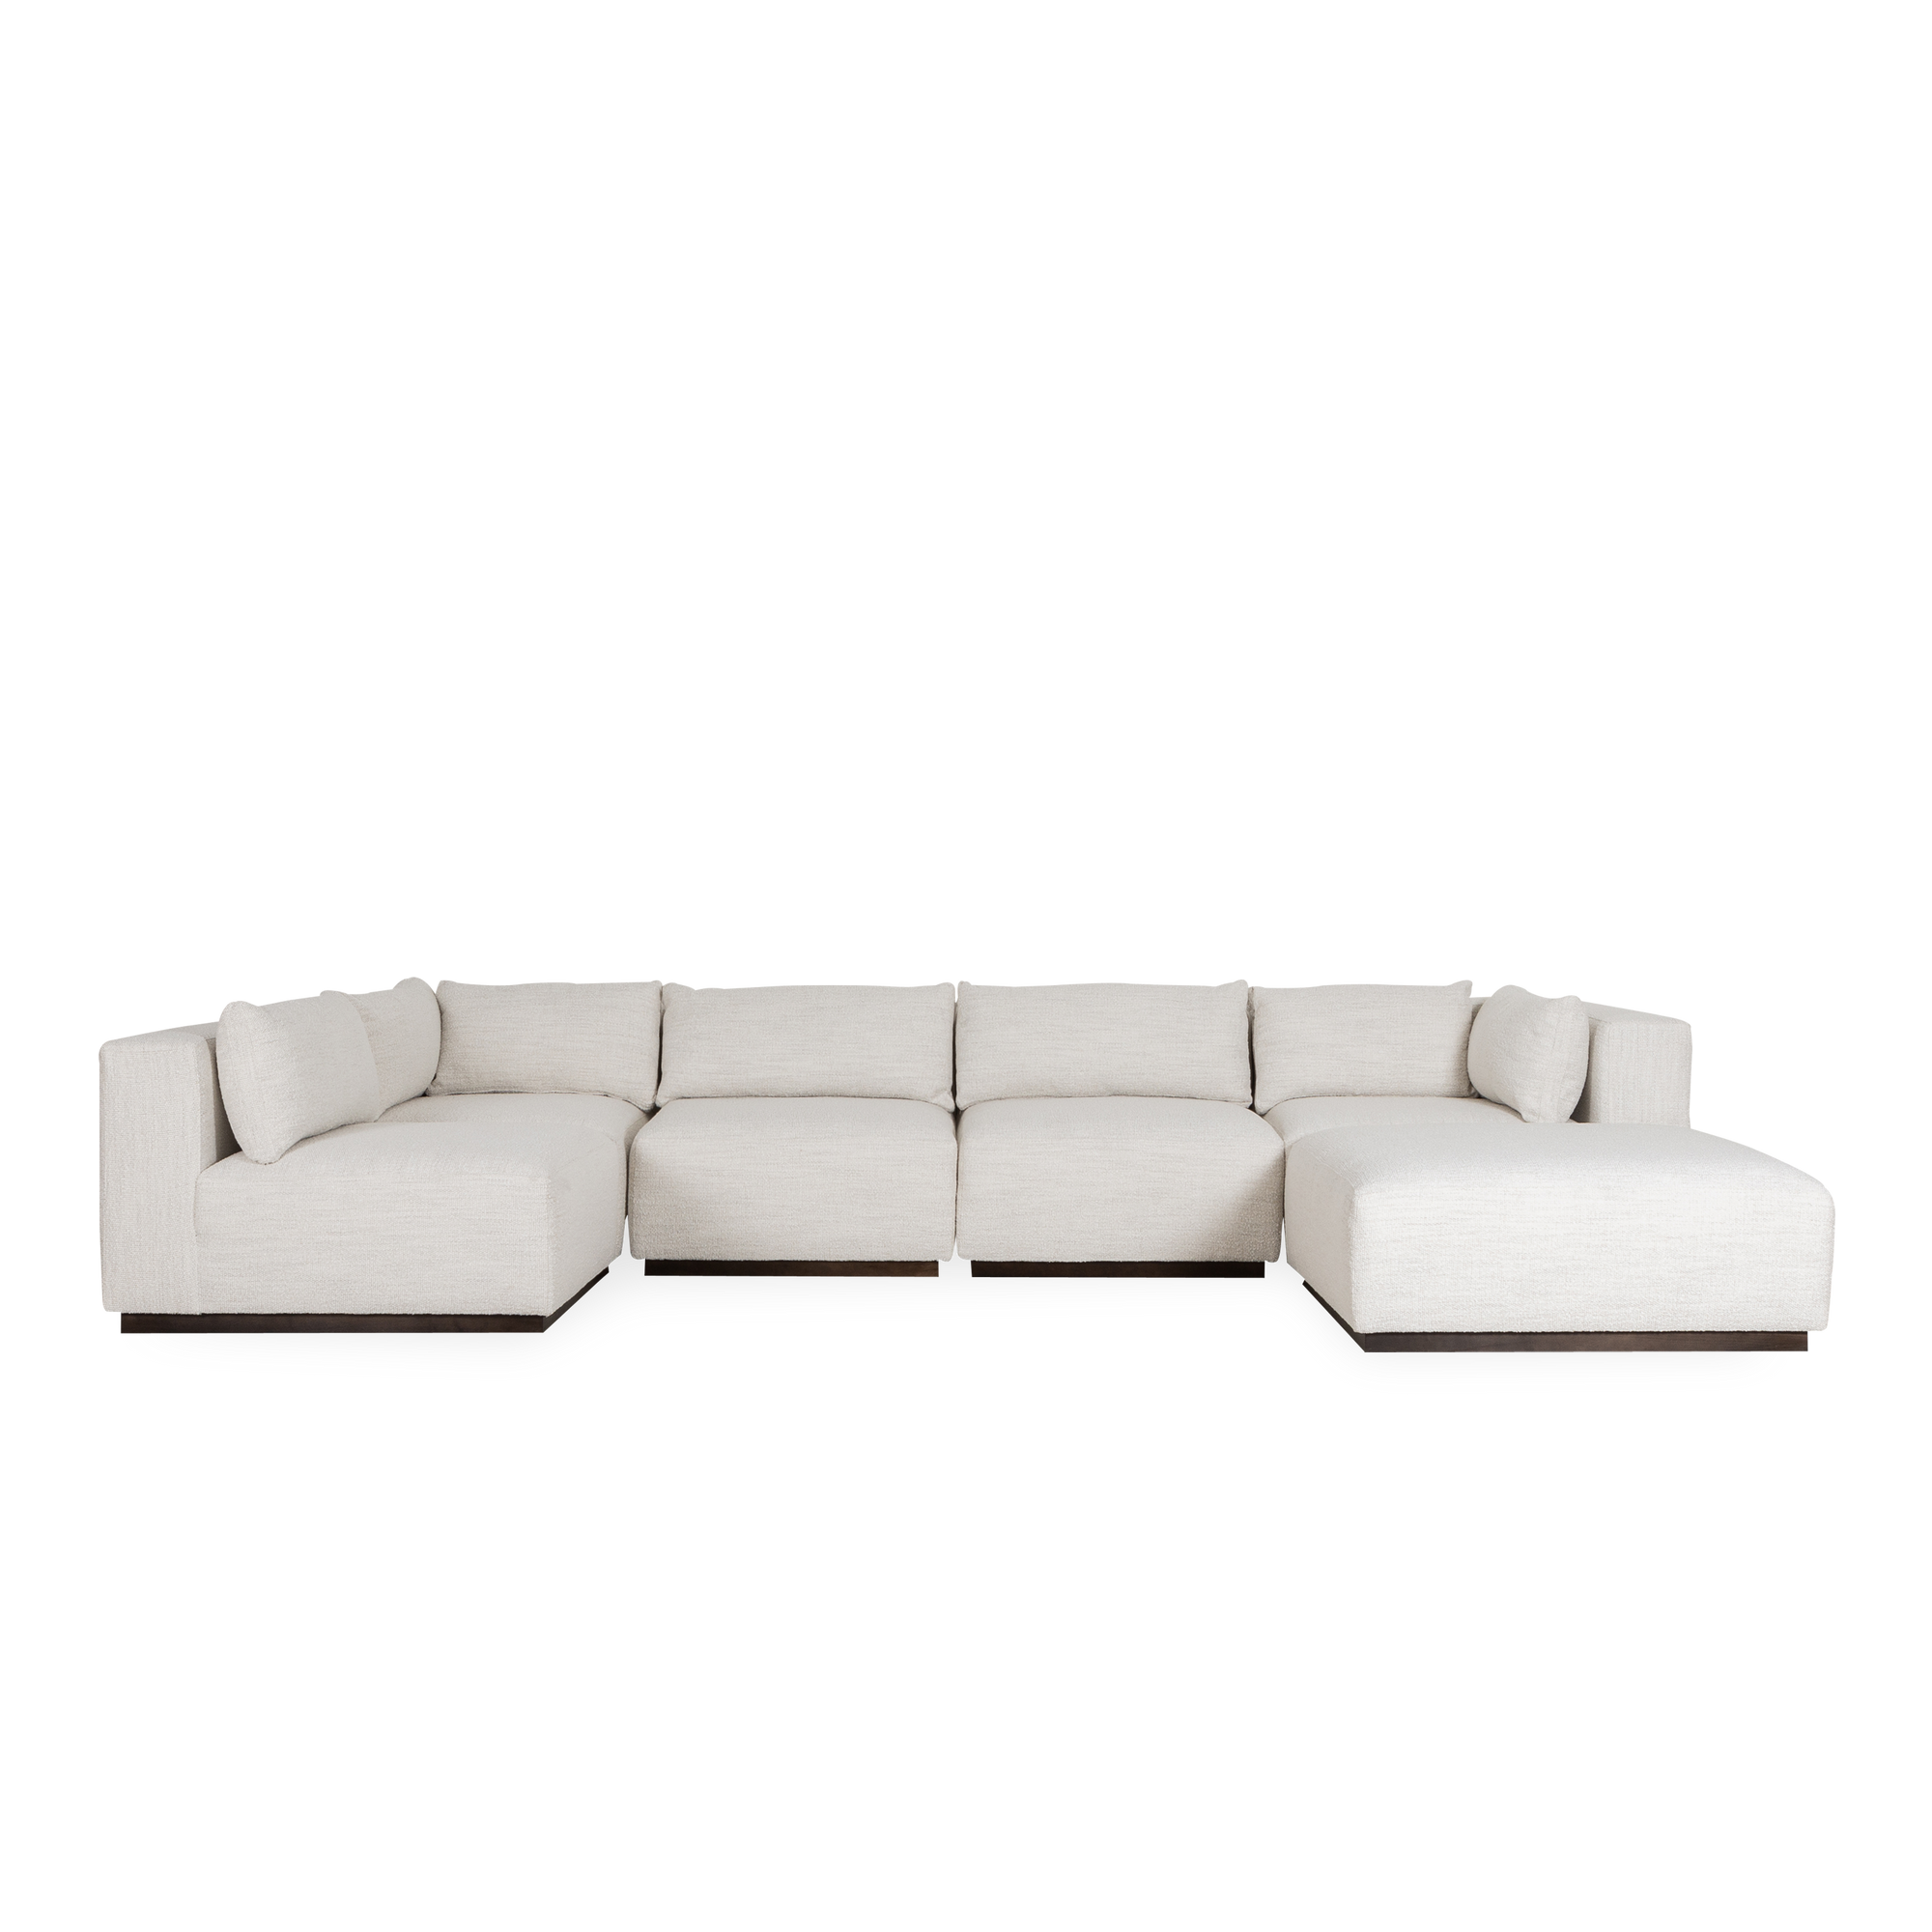 With a minimalist design and low profile, the Crown Modular Sectional is a great way to add a sophisticated touch to your lounge area.